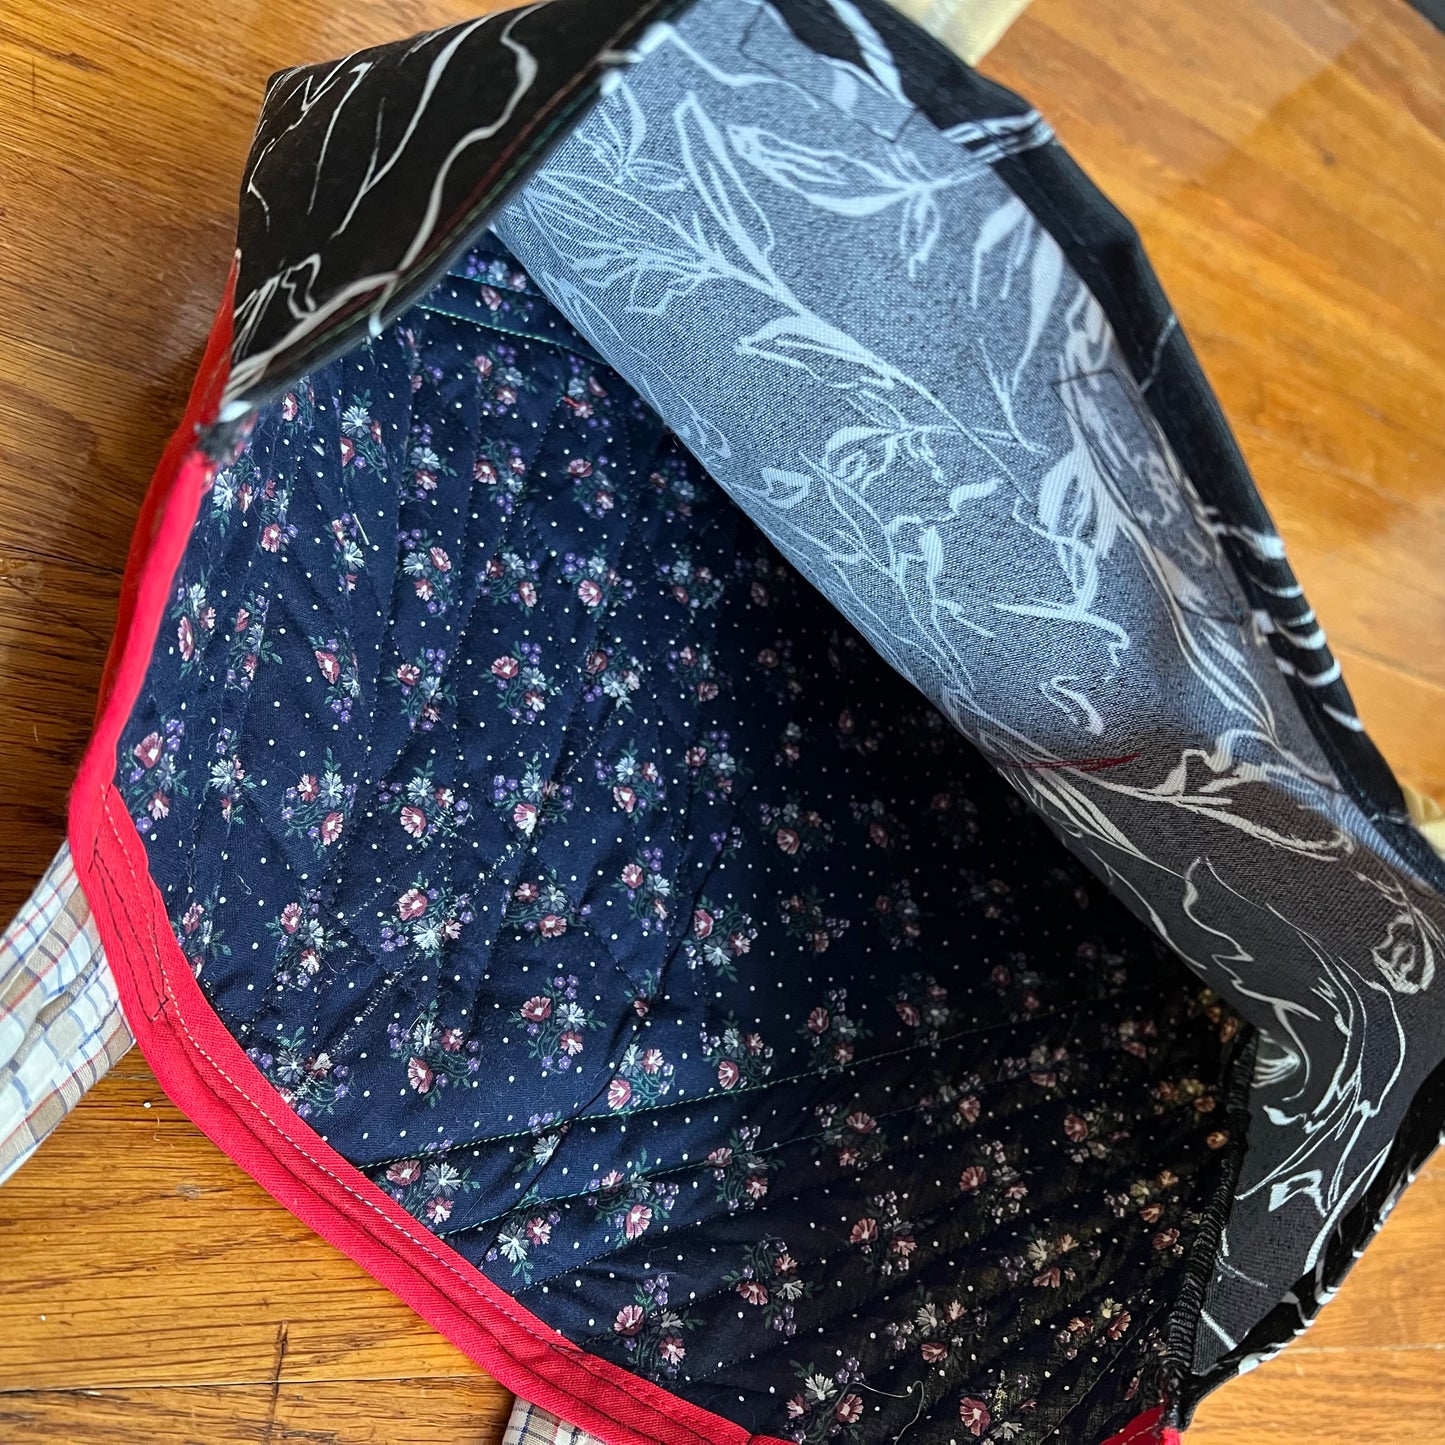 Big Quilted Tote Bag - Cozy and Quilty - Fully Lined with Pockets!